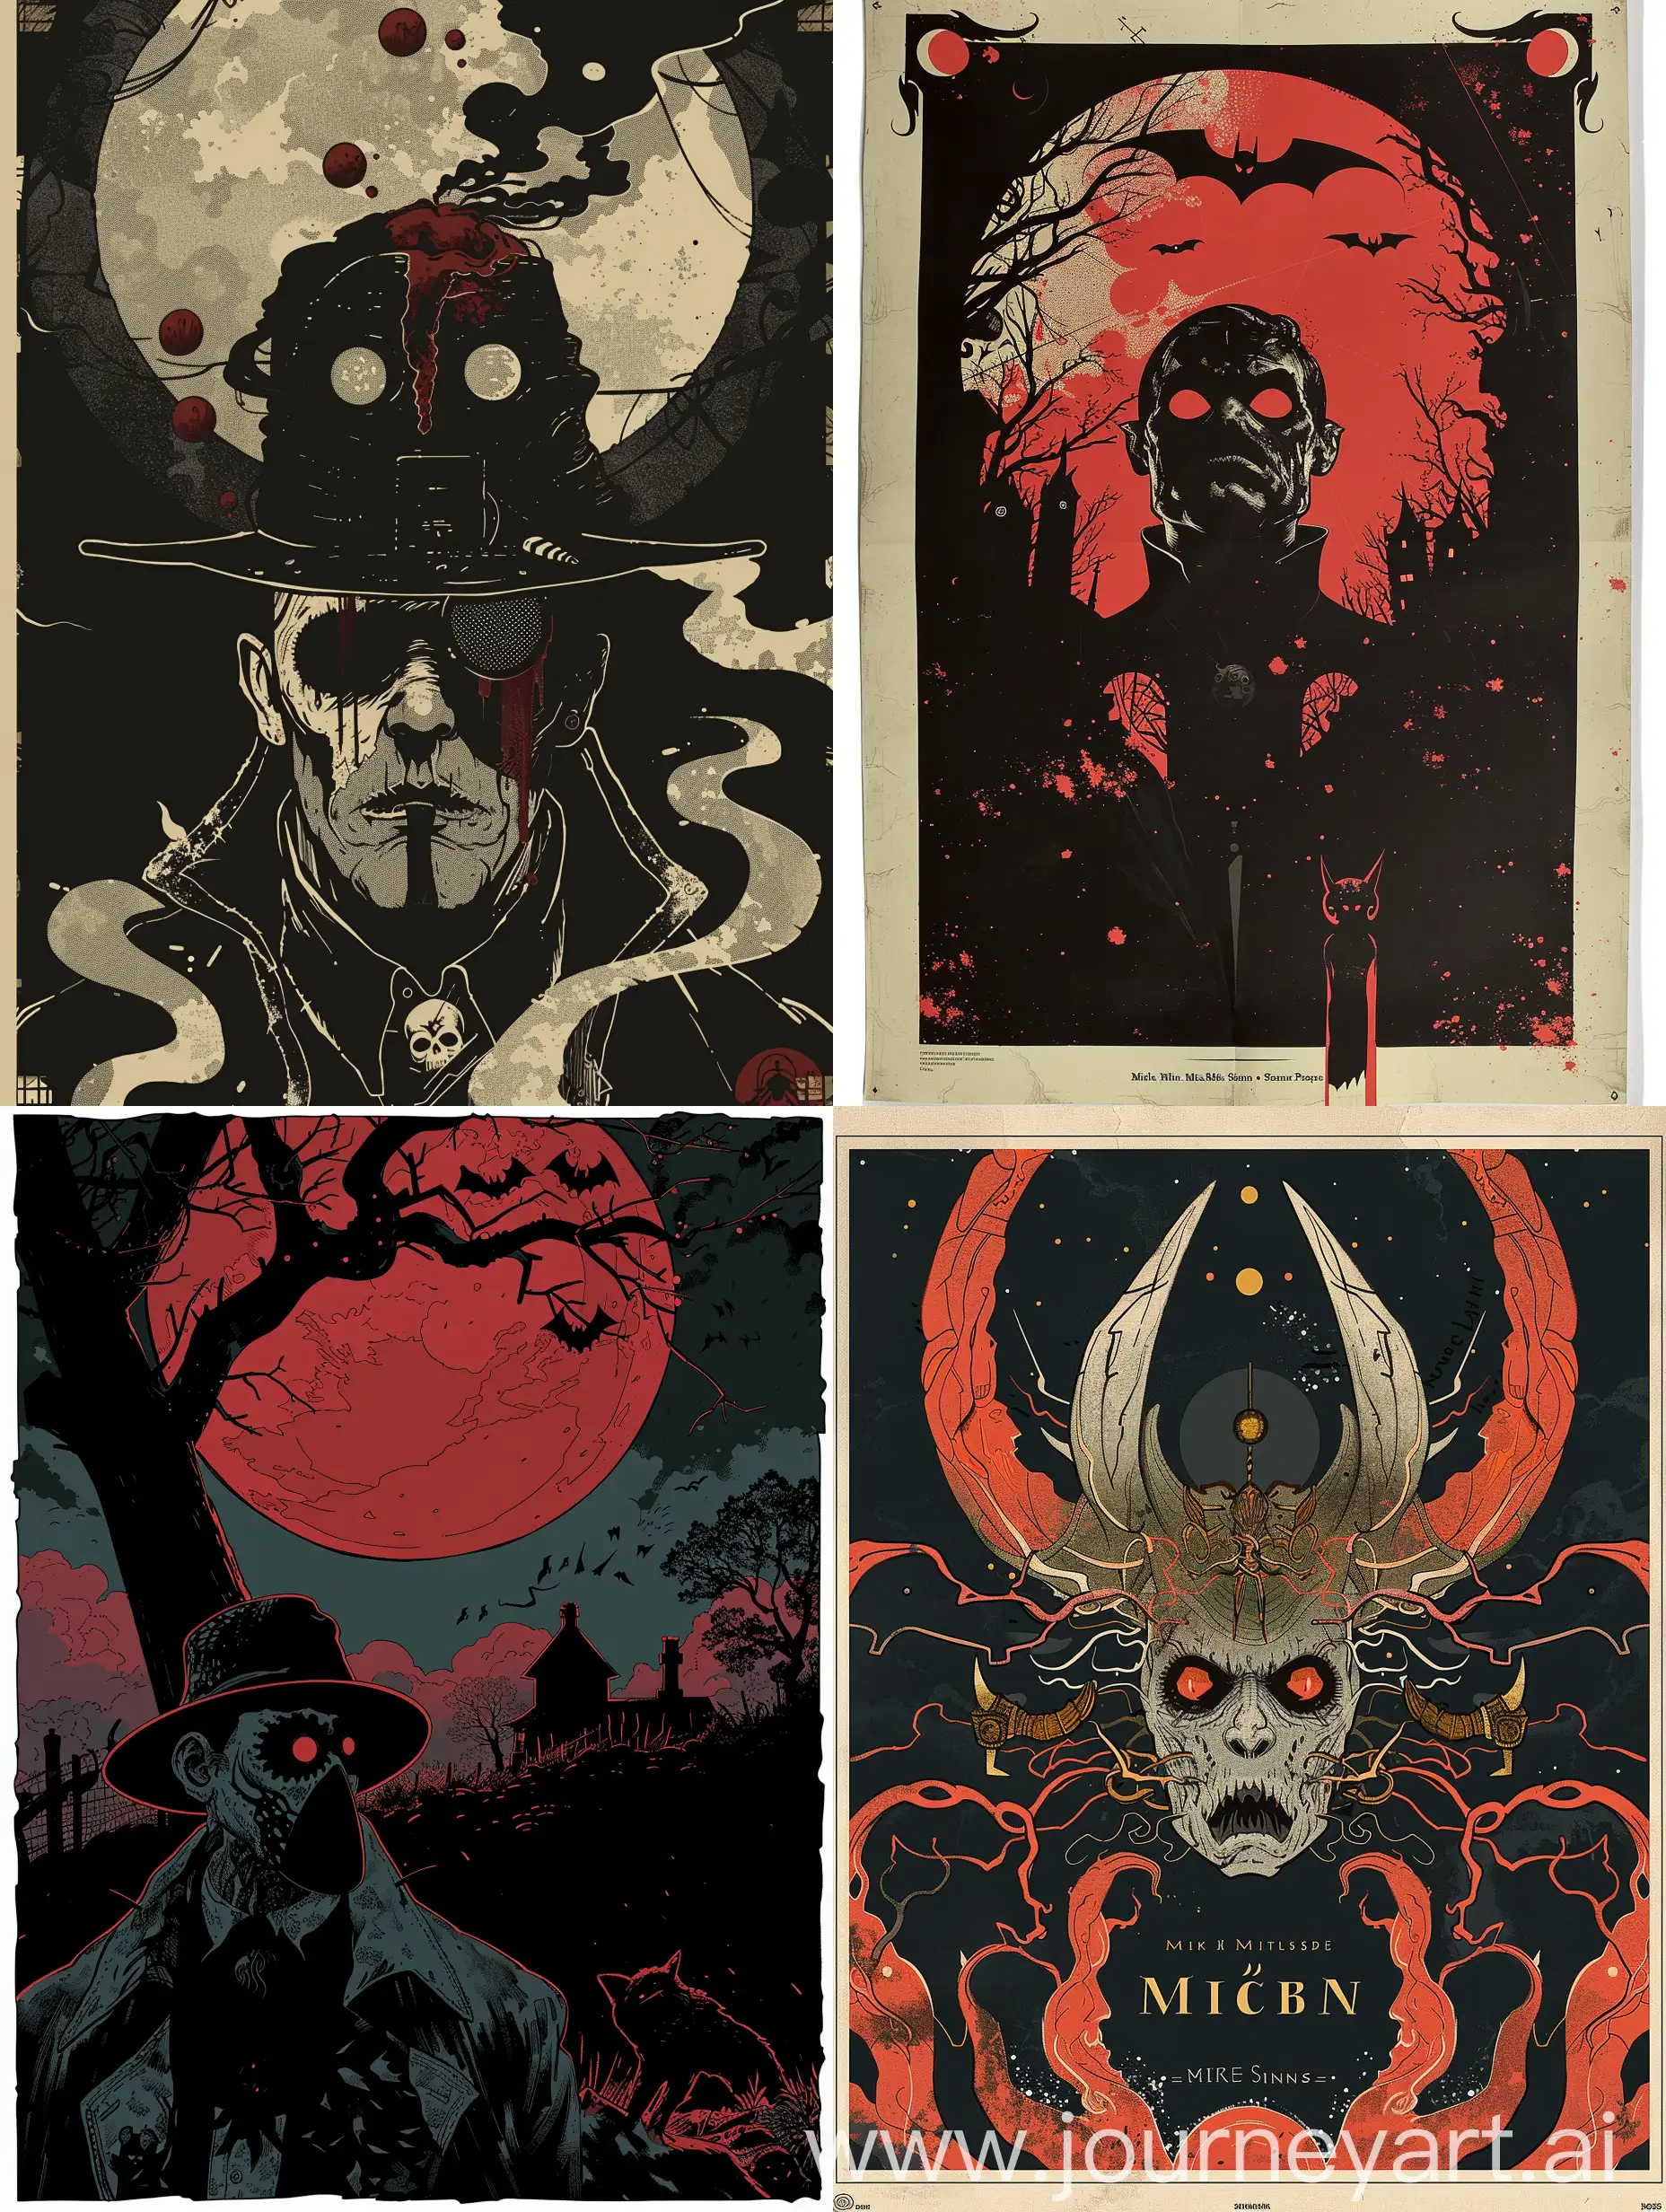 Surrealism-Poster-by-Mike-Mignola-and-Simon-Prades-Intriguing-Collaboration-of-Artistry